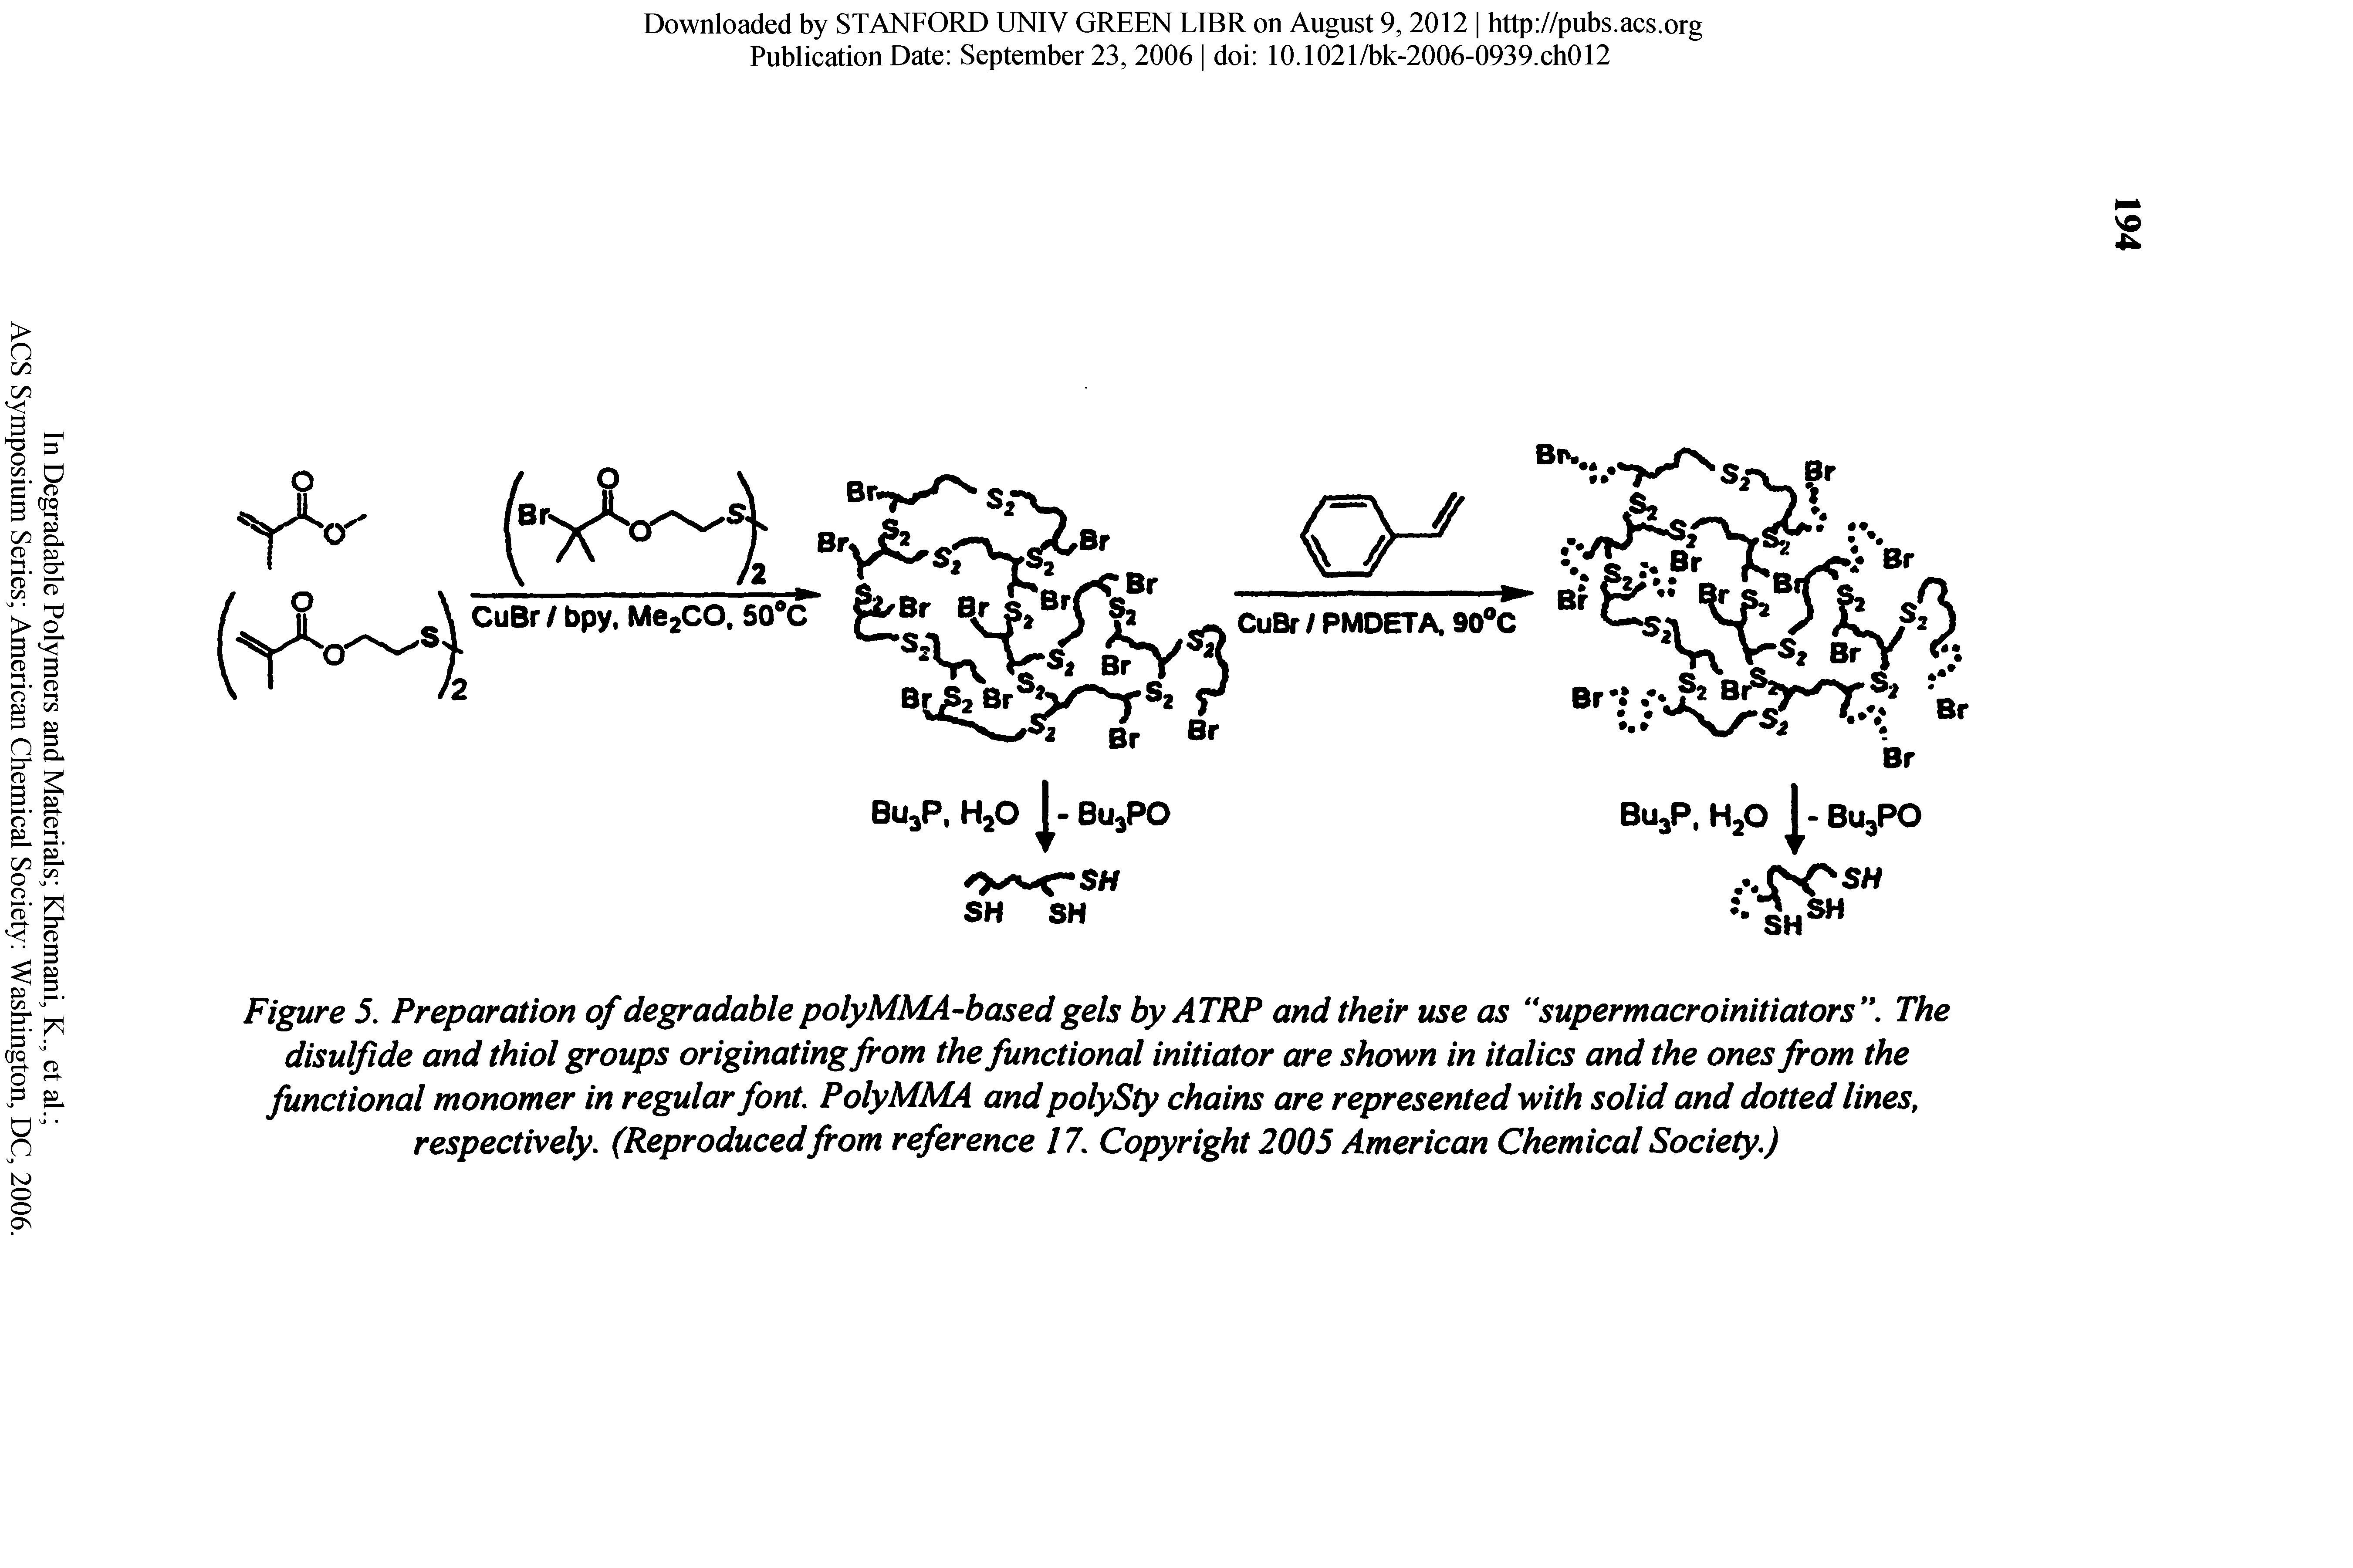 Figure 5. Preparation of degradable polyMMA-based gels by ATRP and their use as supermacroinitiators The disulfide and thiol groups originating from the functional initiator are shown in italics and the ones from the functional monomer in regular font. PolyMMA and polySty chains are represented with solid and dotted lines, respectively. (Reproduced from reference 17. Copyright 2005 American Chemical Society.)...